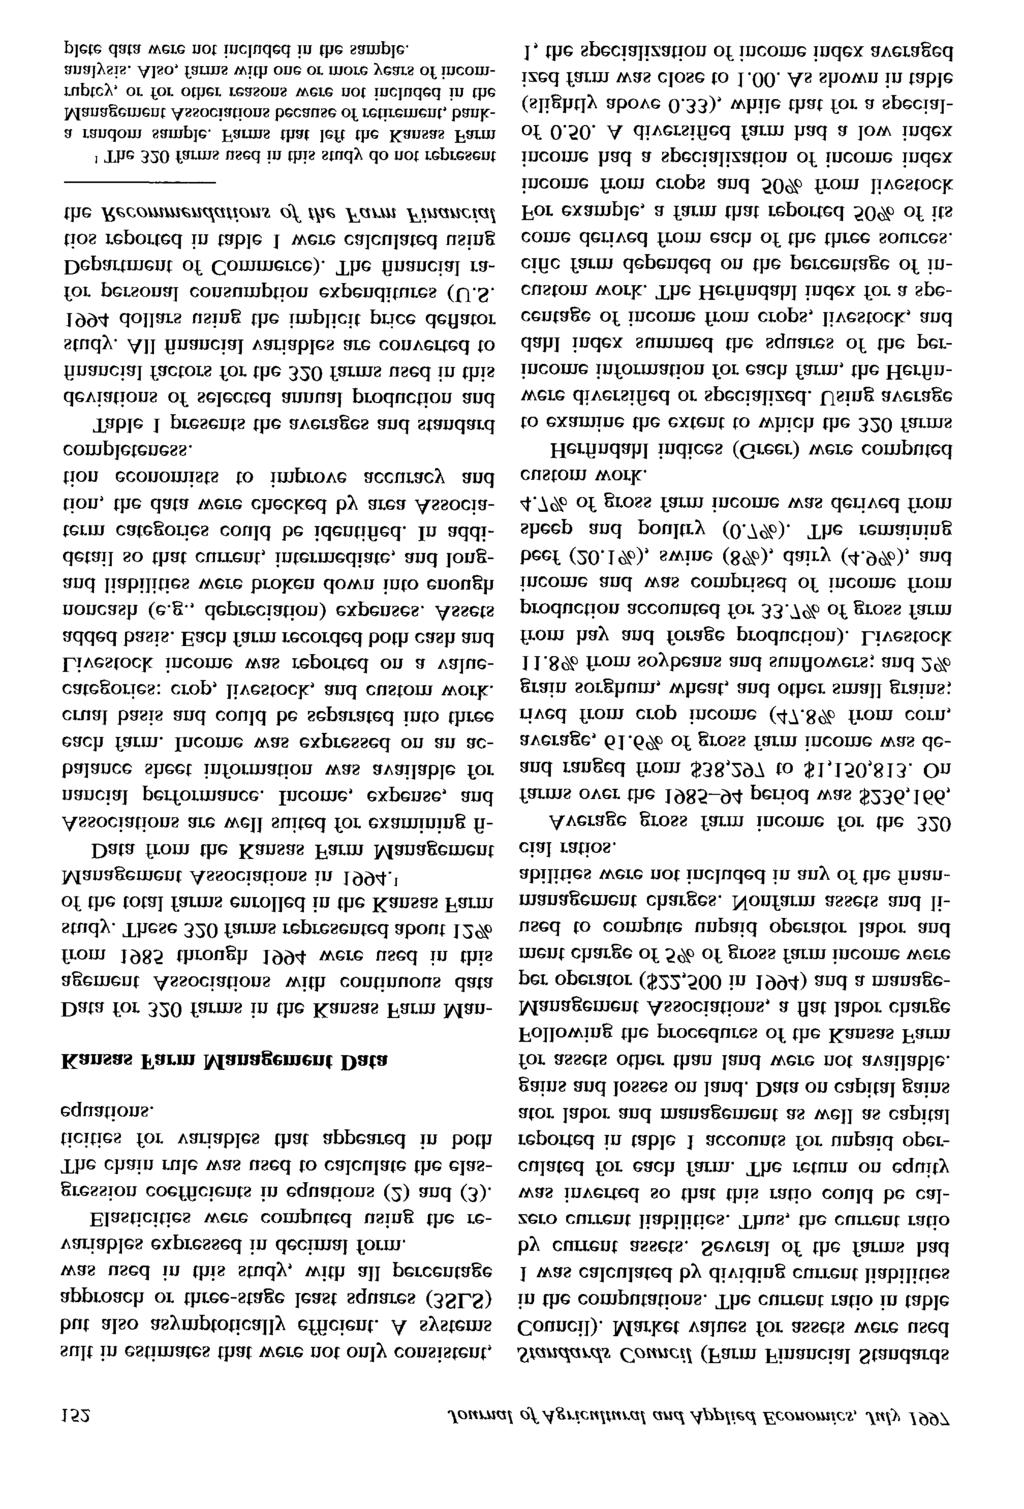 152 Journal of Agricultural and Applied Economics, July 1997 suit in estimates that were not only consistent, but also asymptotically efficient.